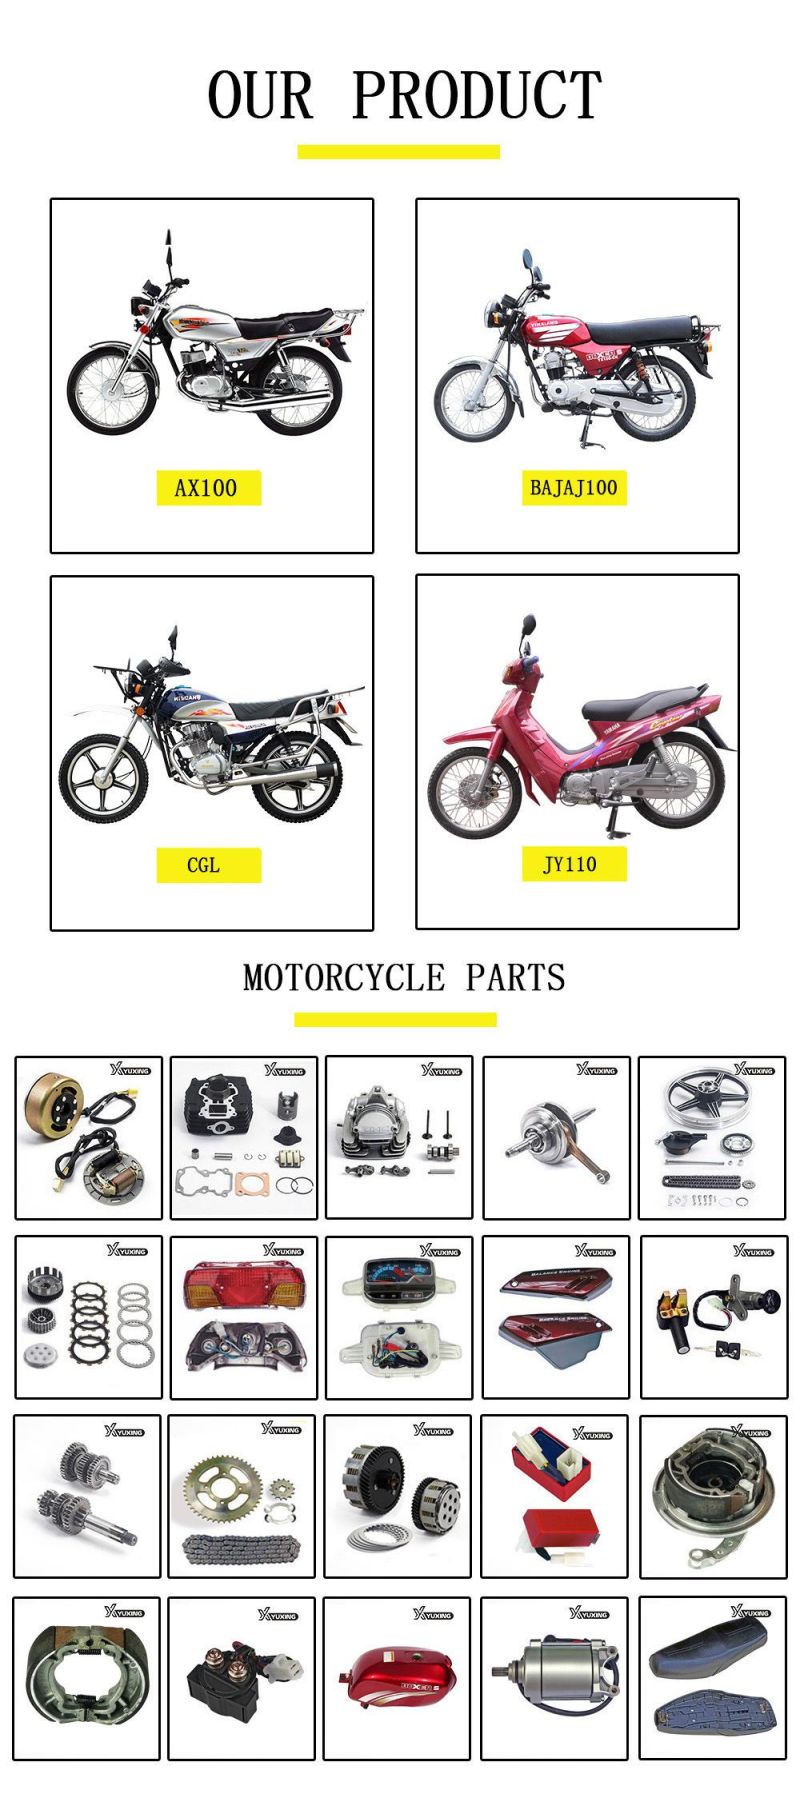 Starting Motor of Accesorios Motorcycle Parts